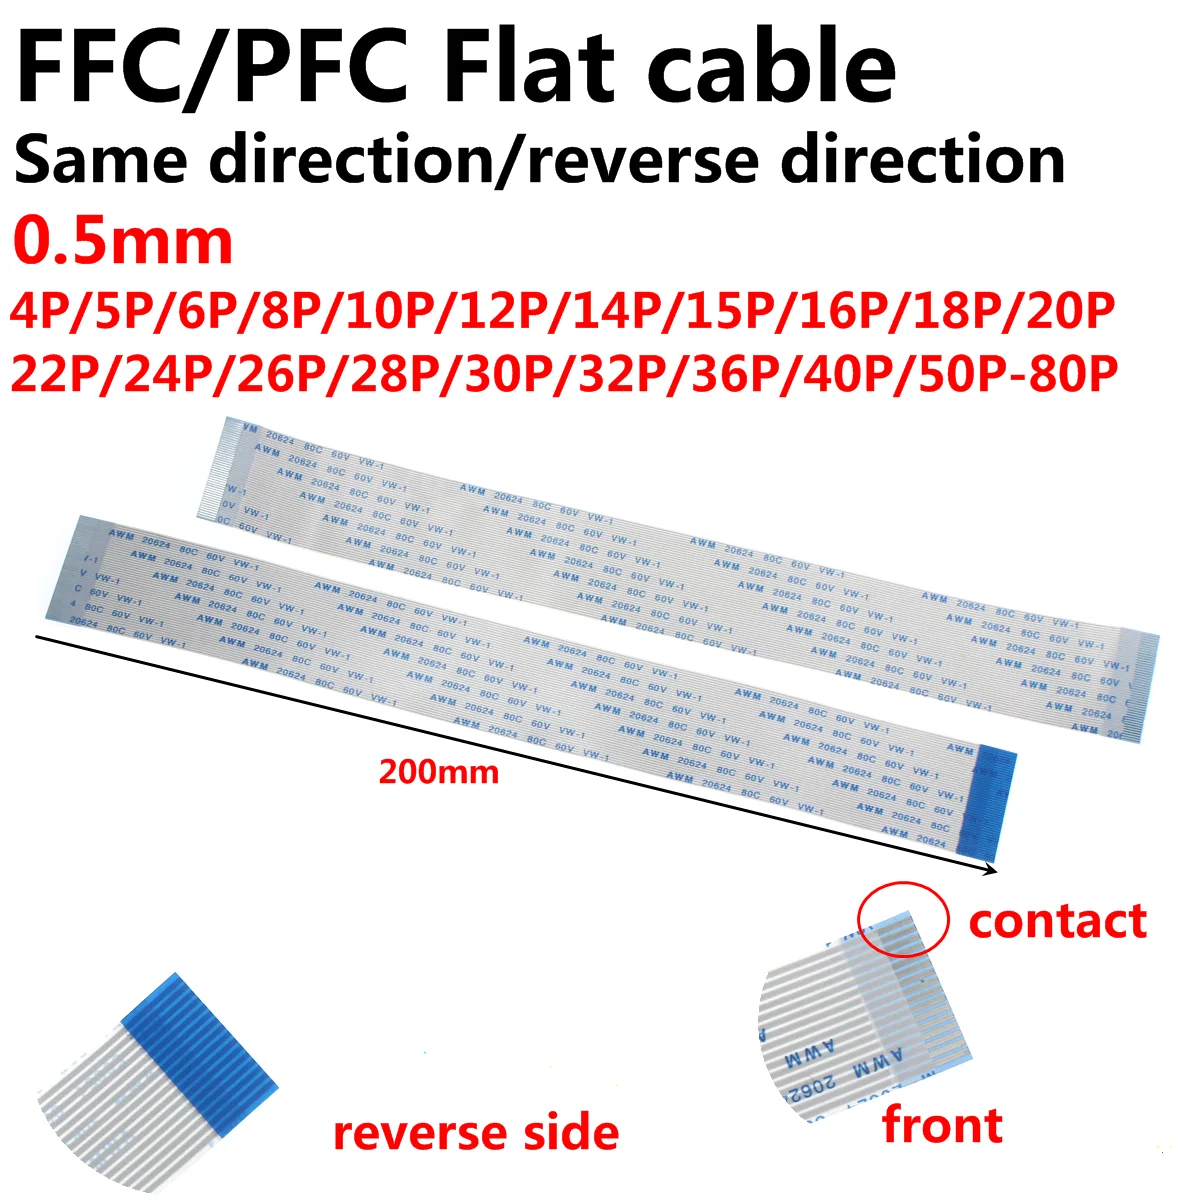 20Pcs FPC Flexible Flat Cable FFC 0.5MM 200MM 20cm A B type interface 4P 5P 6P 8P 10P 12P 14P 16P 18P 20P 22P 24P-40P 15cm ajazz al60 tpe data cable keyboard accessory flexible 20 230cm usb type c interface yellow